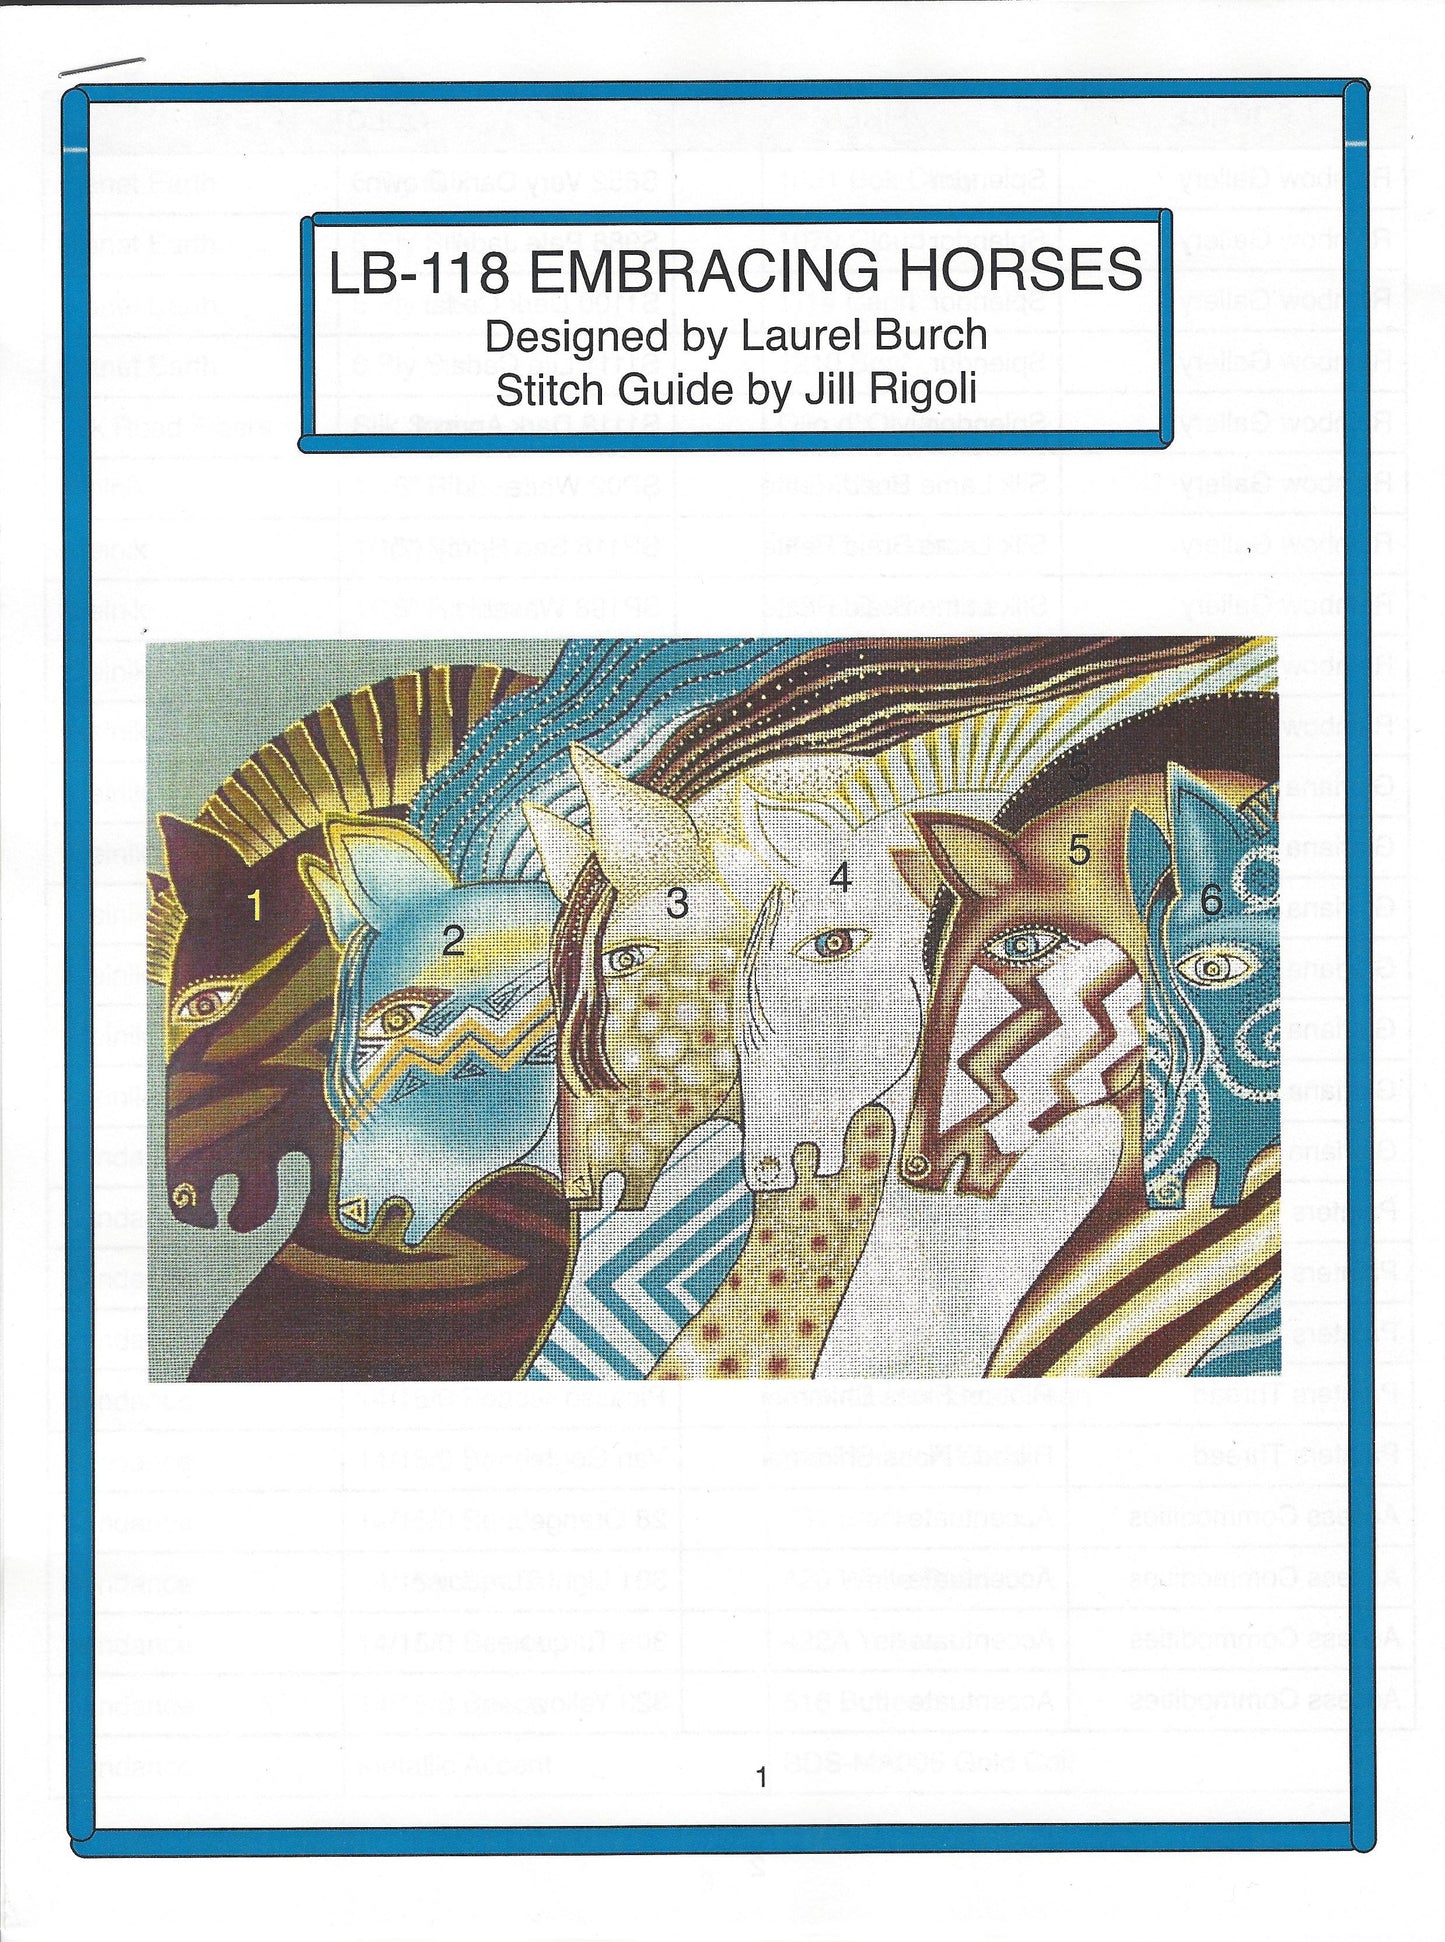 Embracing Horses & STITCH GUIDE Large handpainted Canvas design by Laurel Burch from Danji